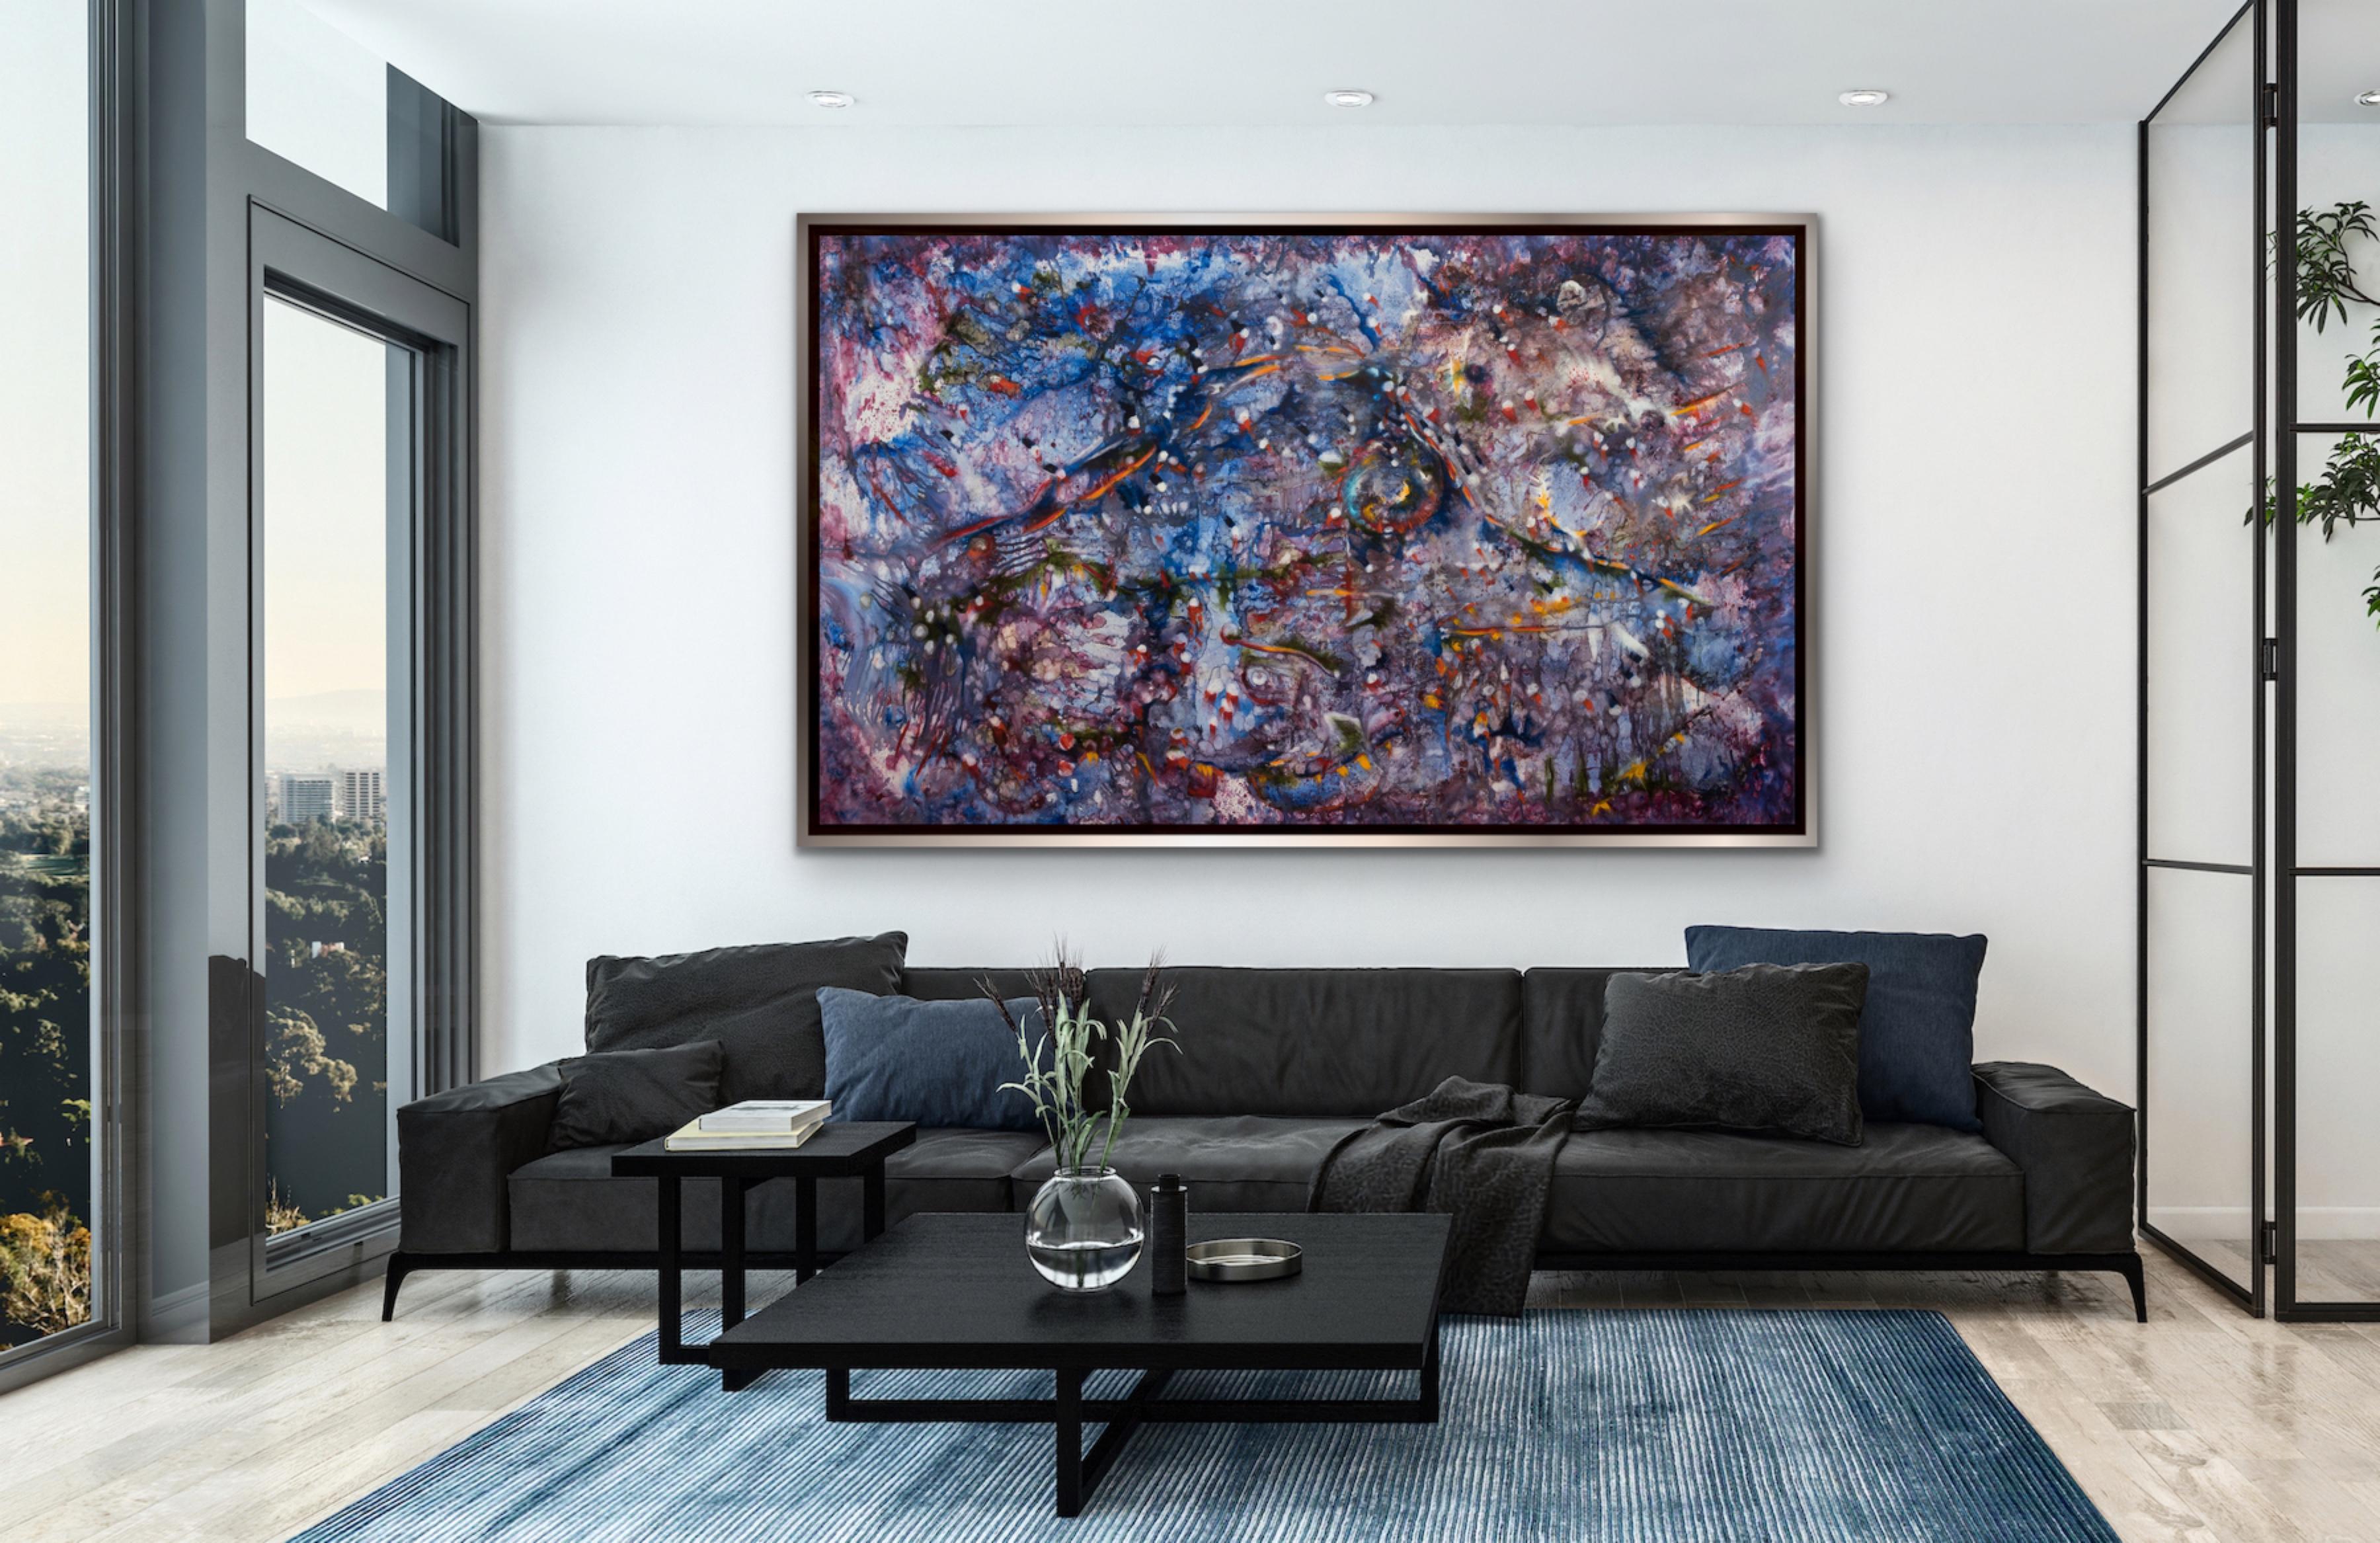 MARINE COSMOS Large Blue Violet Red colorful abstract surrealist Armenian Artist - Painting by Vatche Geuvdjelian 